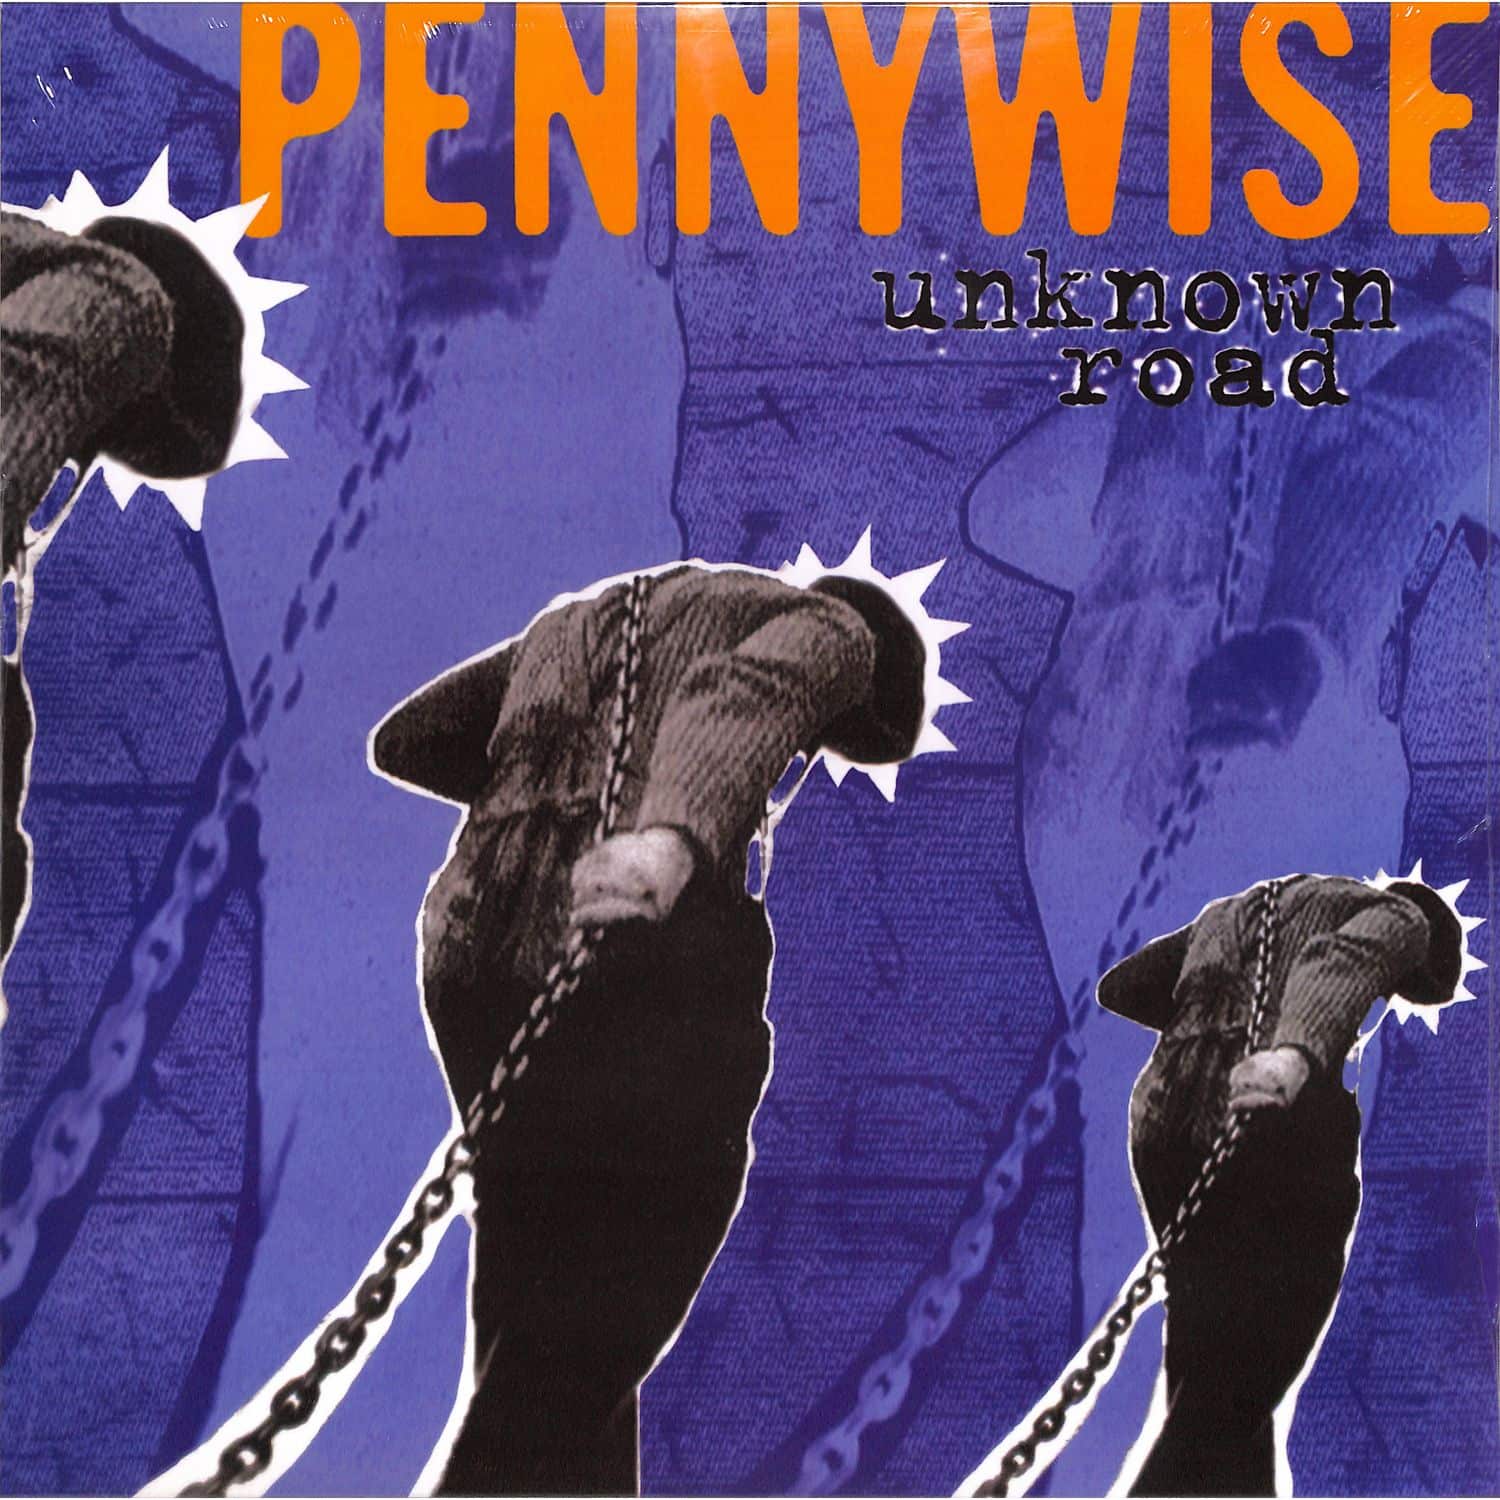 Pennywise - UNKNOWN ROAD 